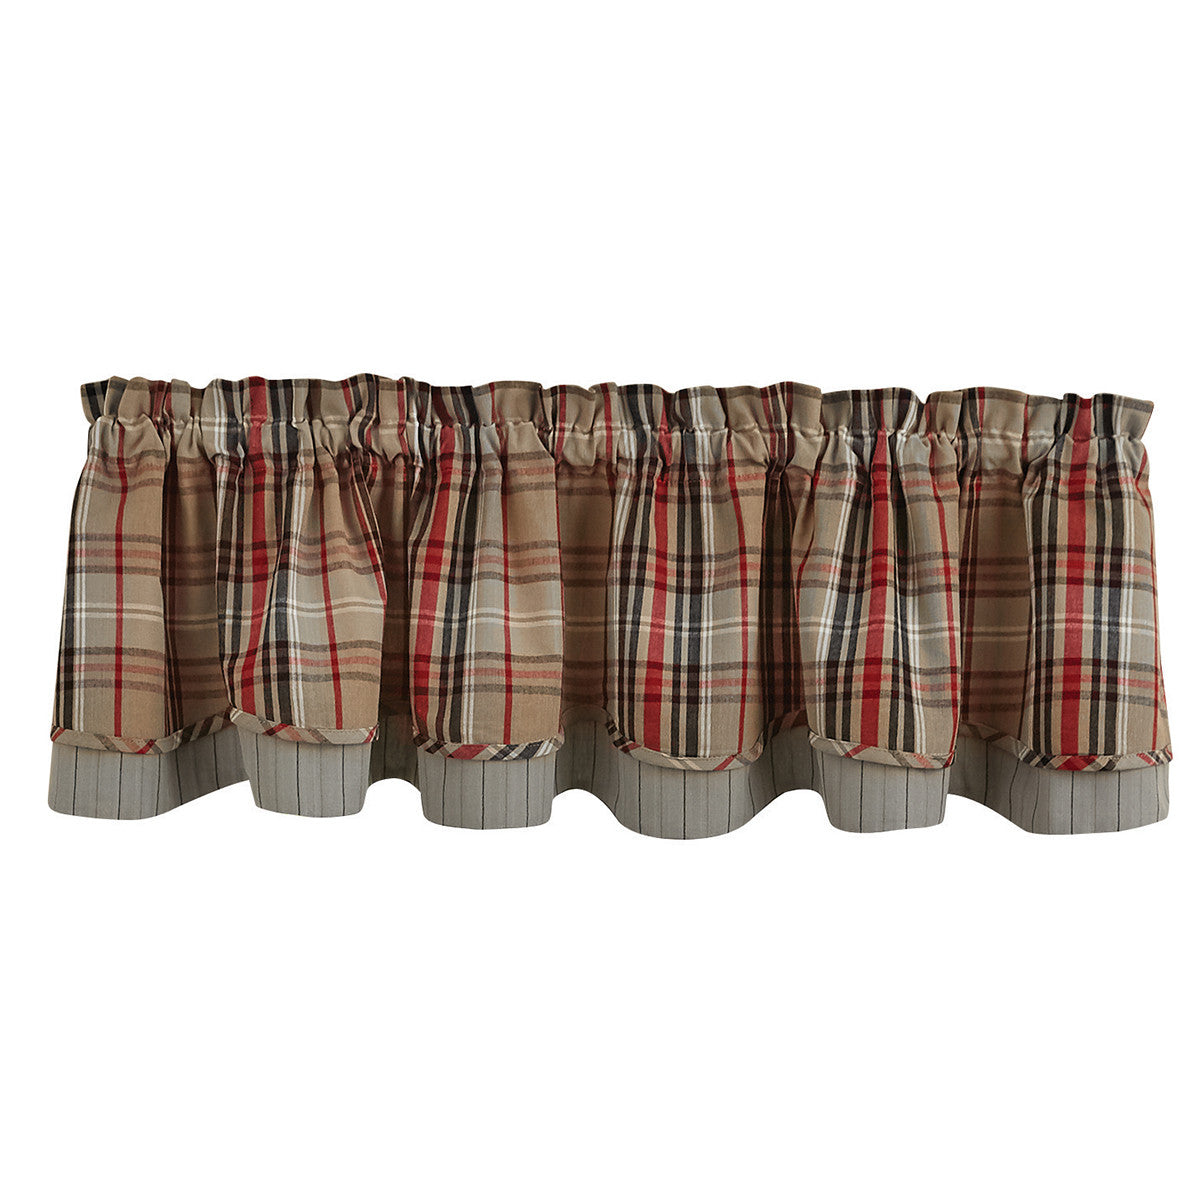 Bear Country Plaid Valance - Lined Layered Park Designs